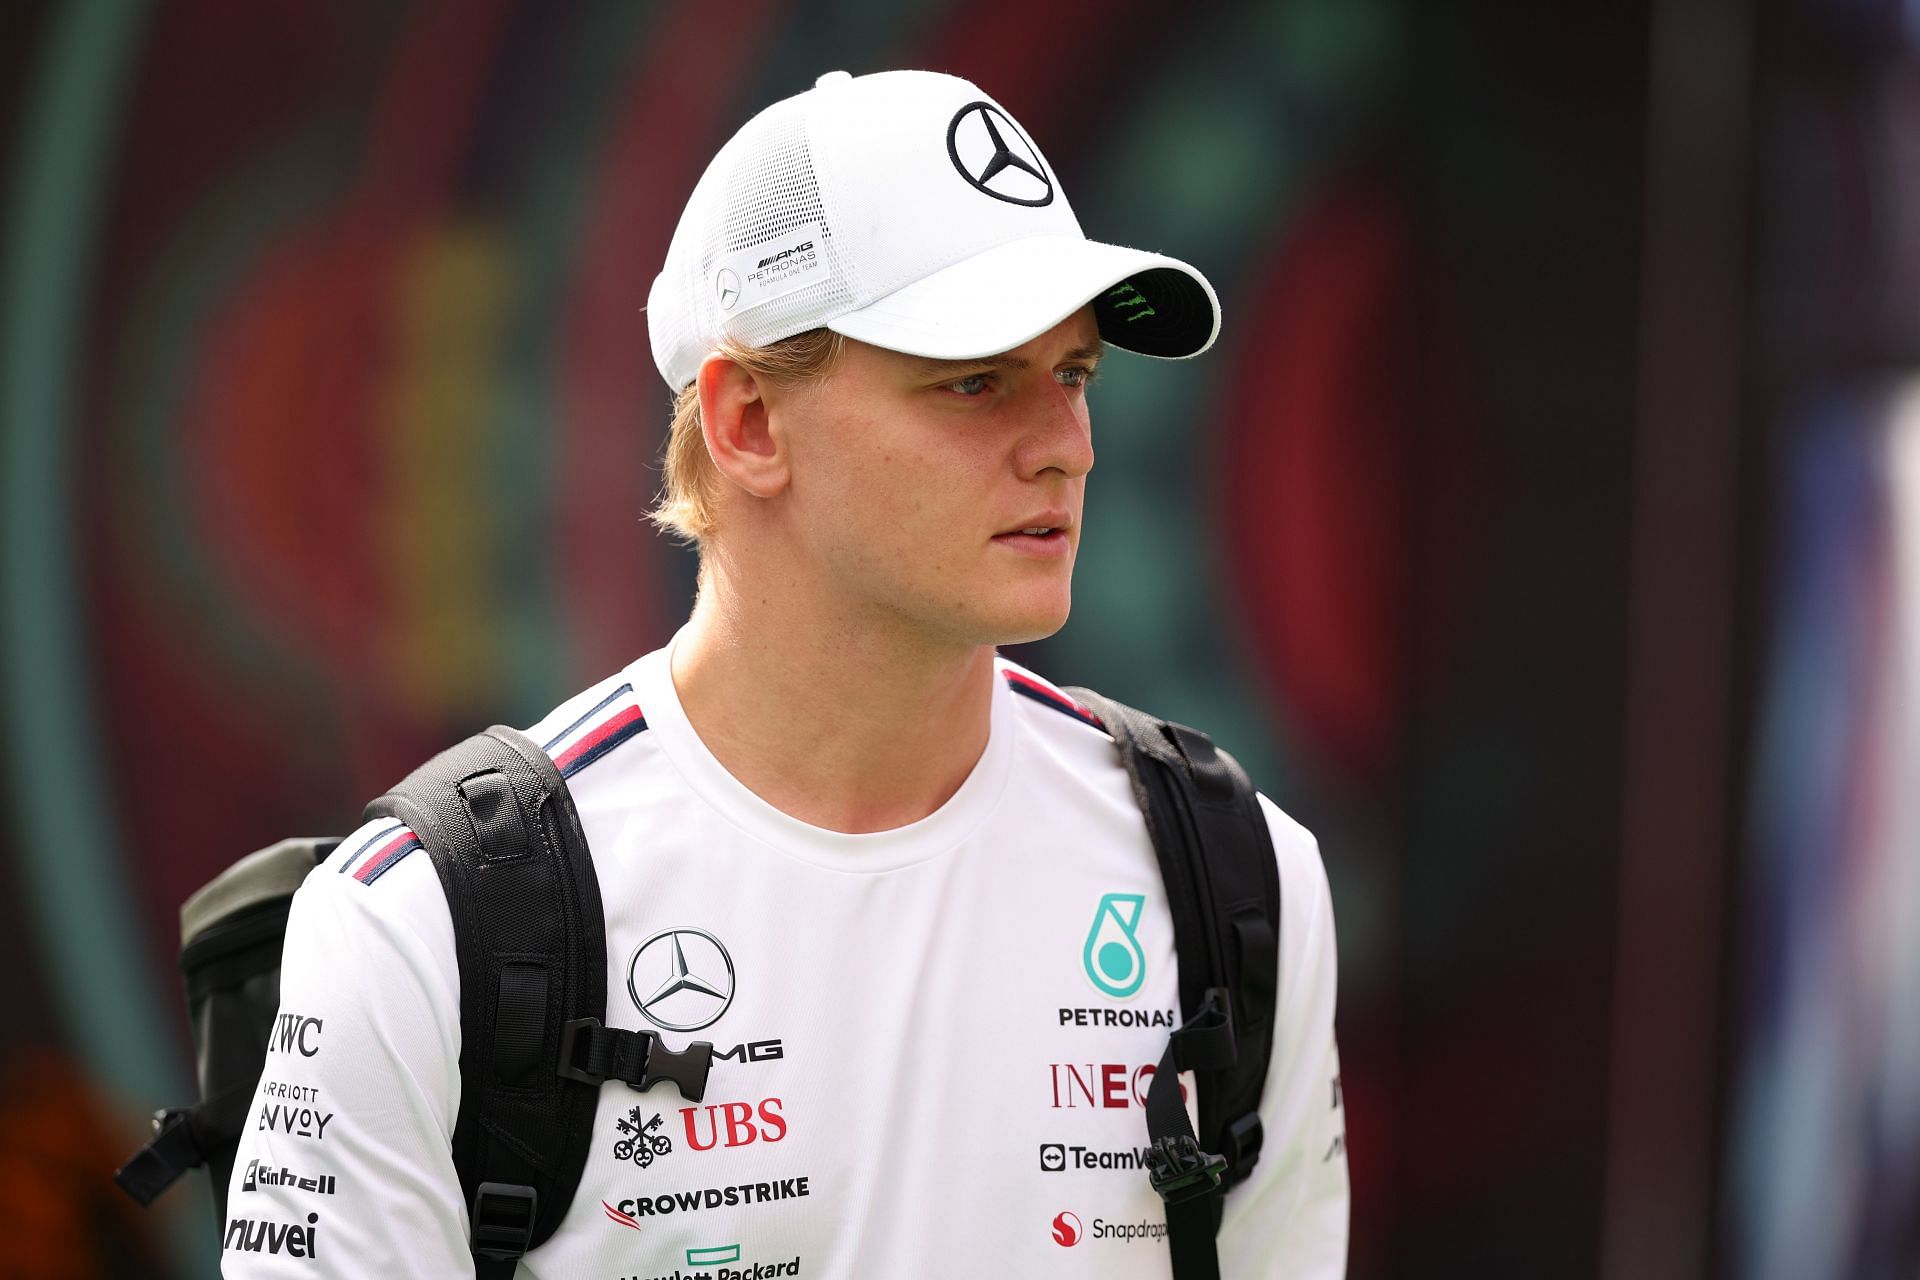 Mick Schumacher on how moving to Mercedes from Haas has opened his eyes